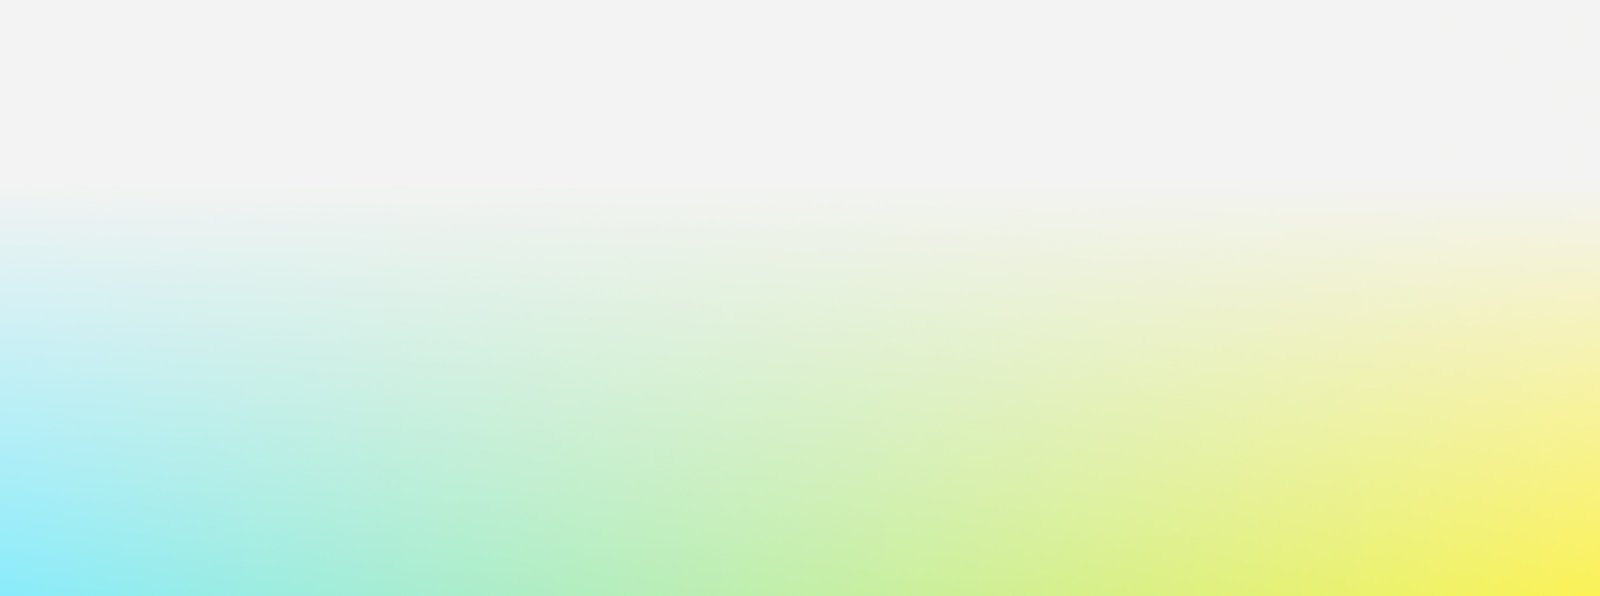 An image of a yellow and blue gradient background.